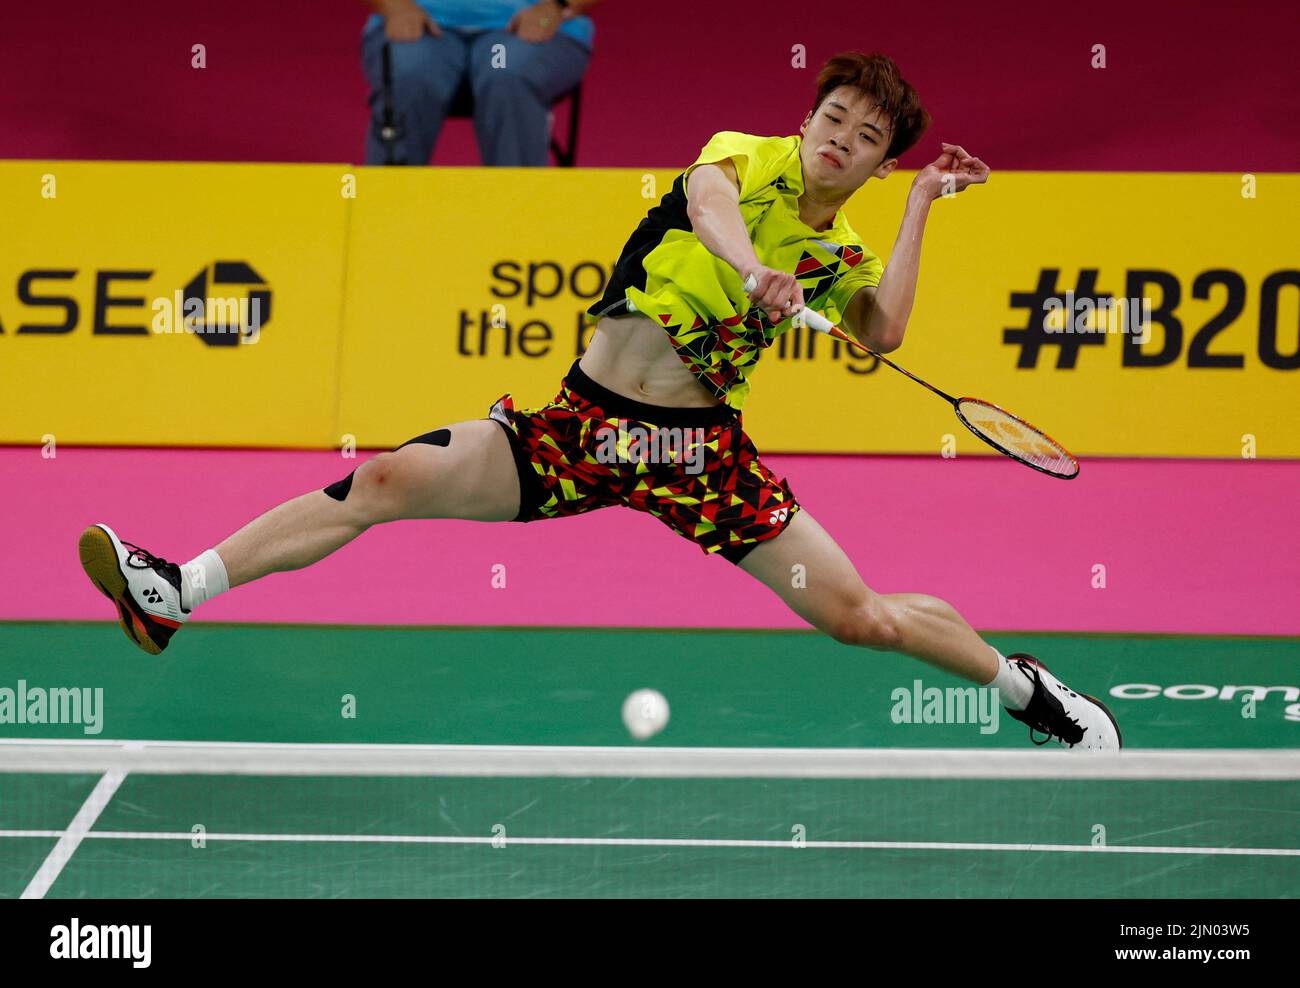 Commonwealth Games - Badminton - Men's Singles - Gold Medal Match - The NEC Hall 5, Birmingham, Britain - August 8, 2022 Malaysia's Tze Yong Ng in action REUTERS/Jason Cairnduff Stock Photo